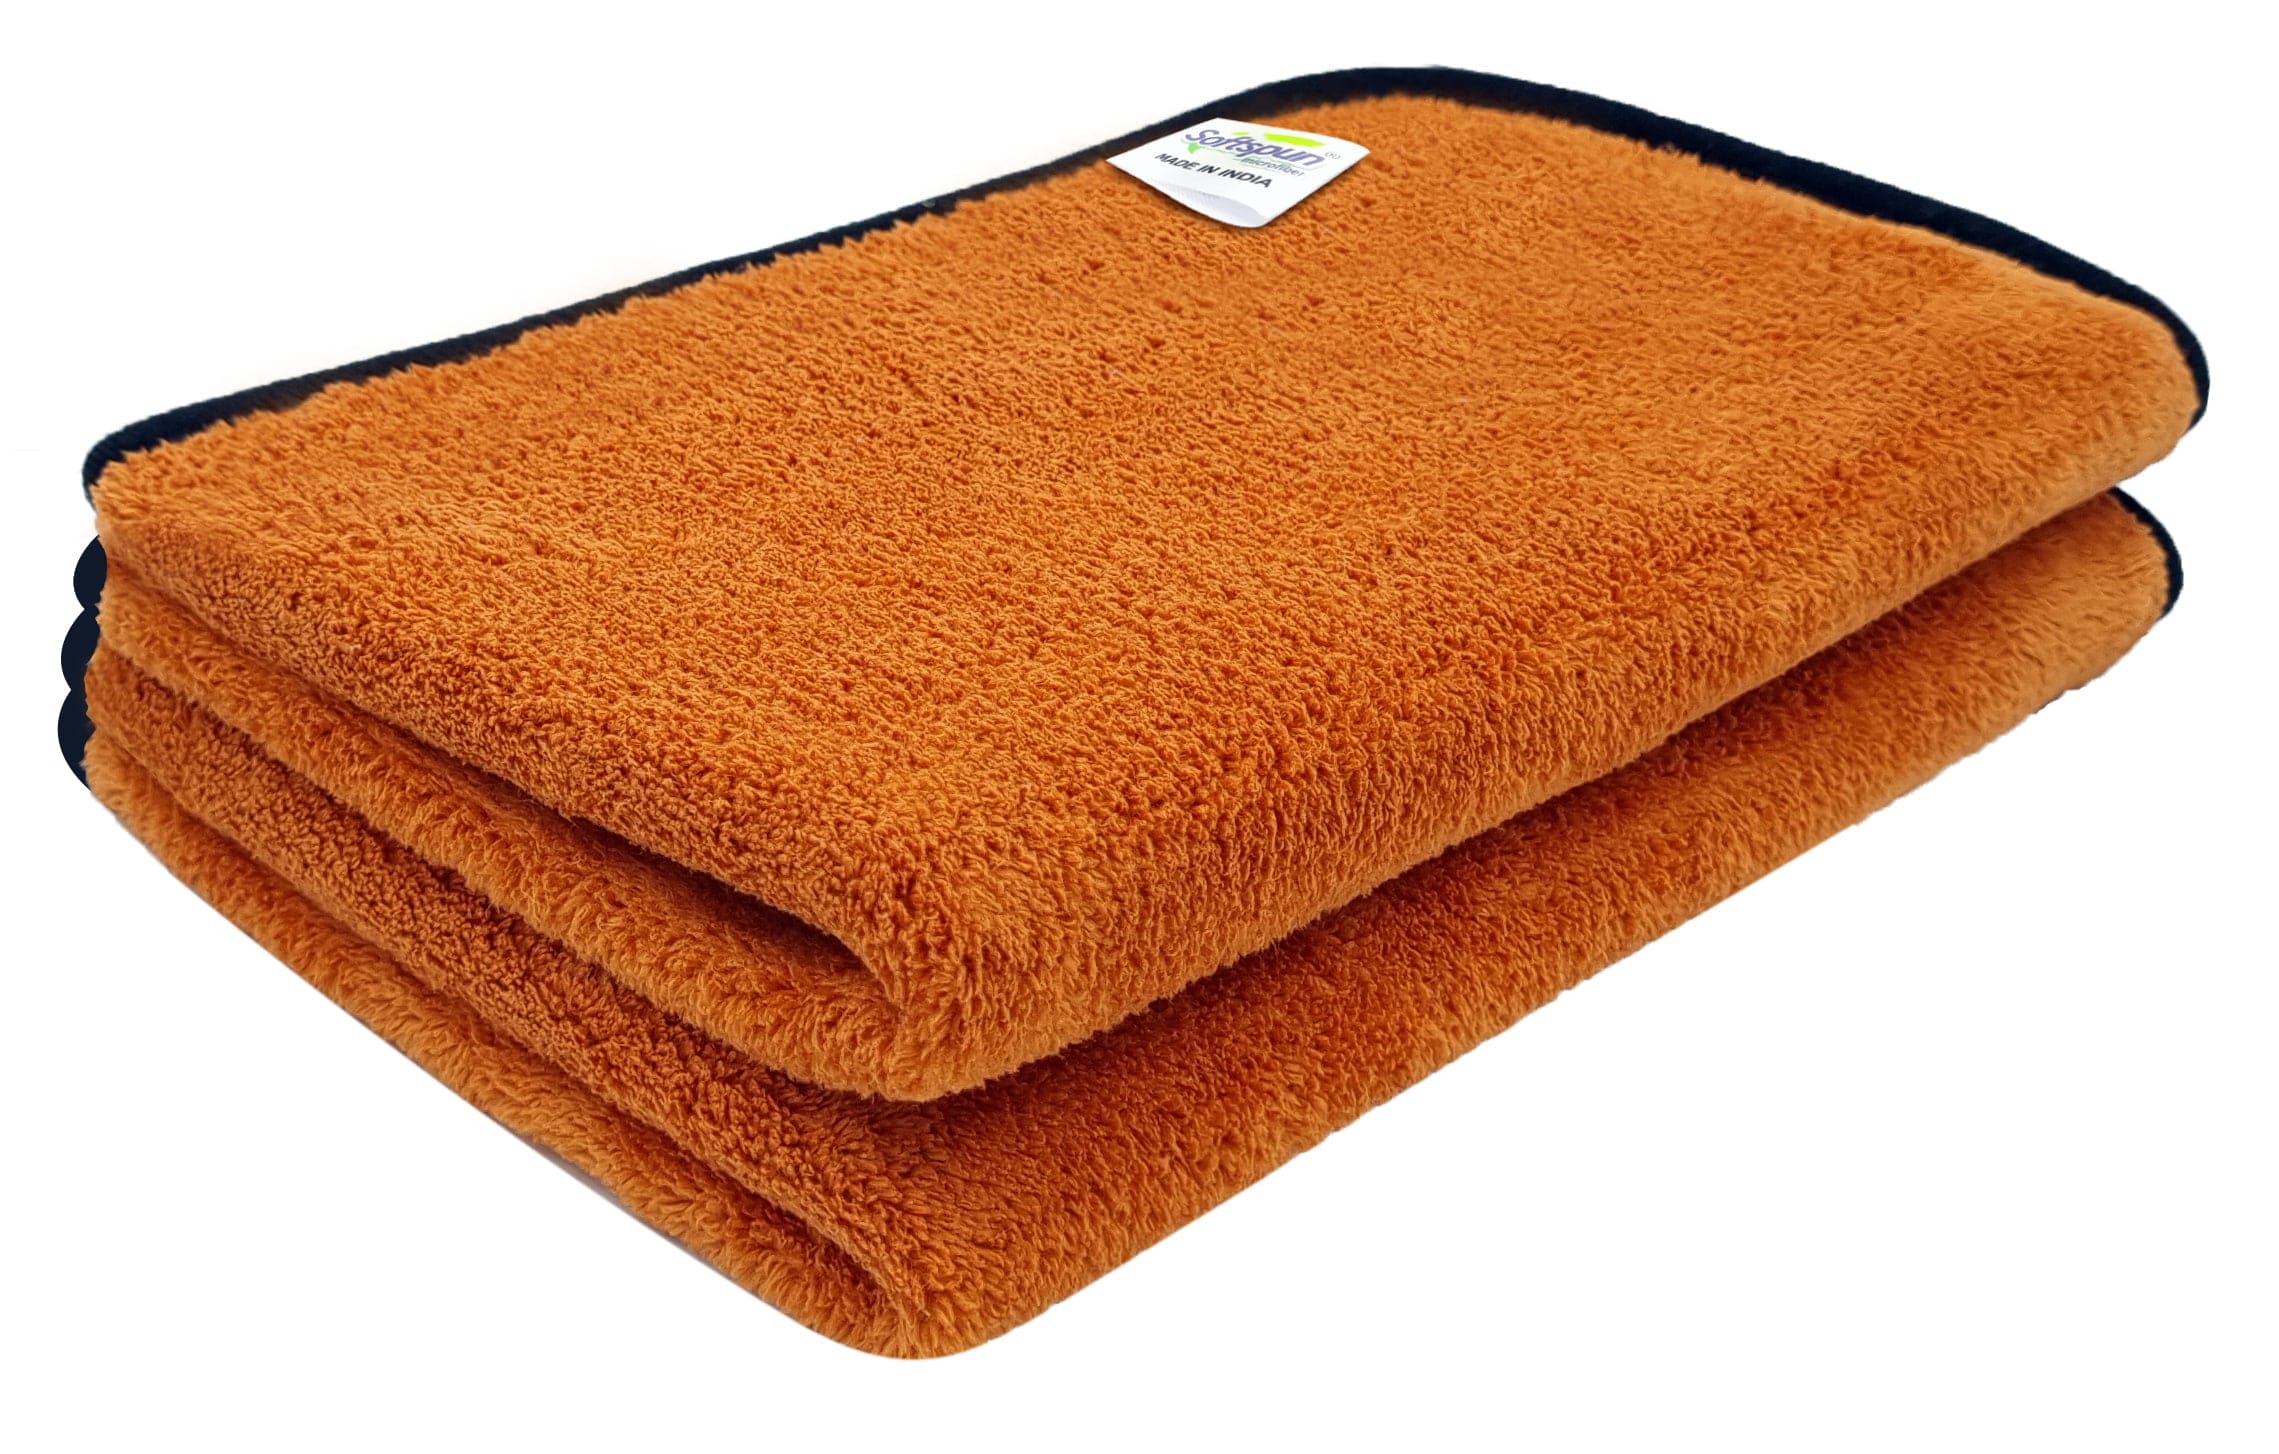 SOFTSPUN Microfiber Wipes Large Baby Towel 2 pc 40X60cm 280GSM  Ultra Absorbent Super Soft & Comfortable Quick Drying for Men & Women Daily Use Pack of 1 Extra Large Size Unisex.